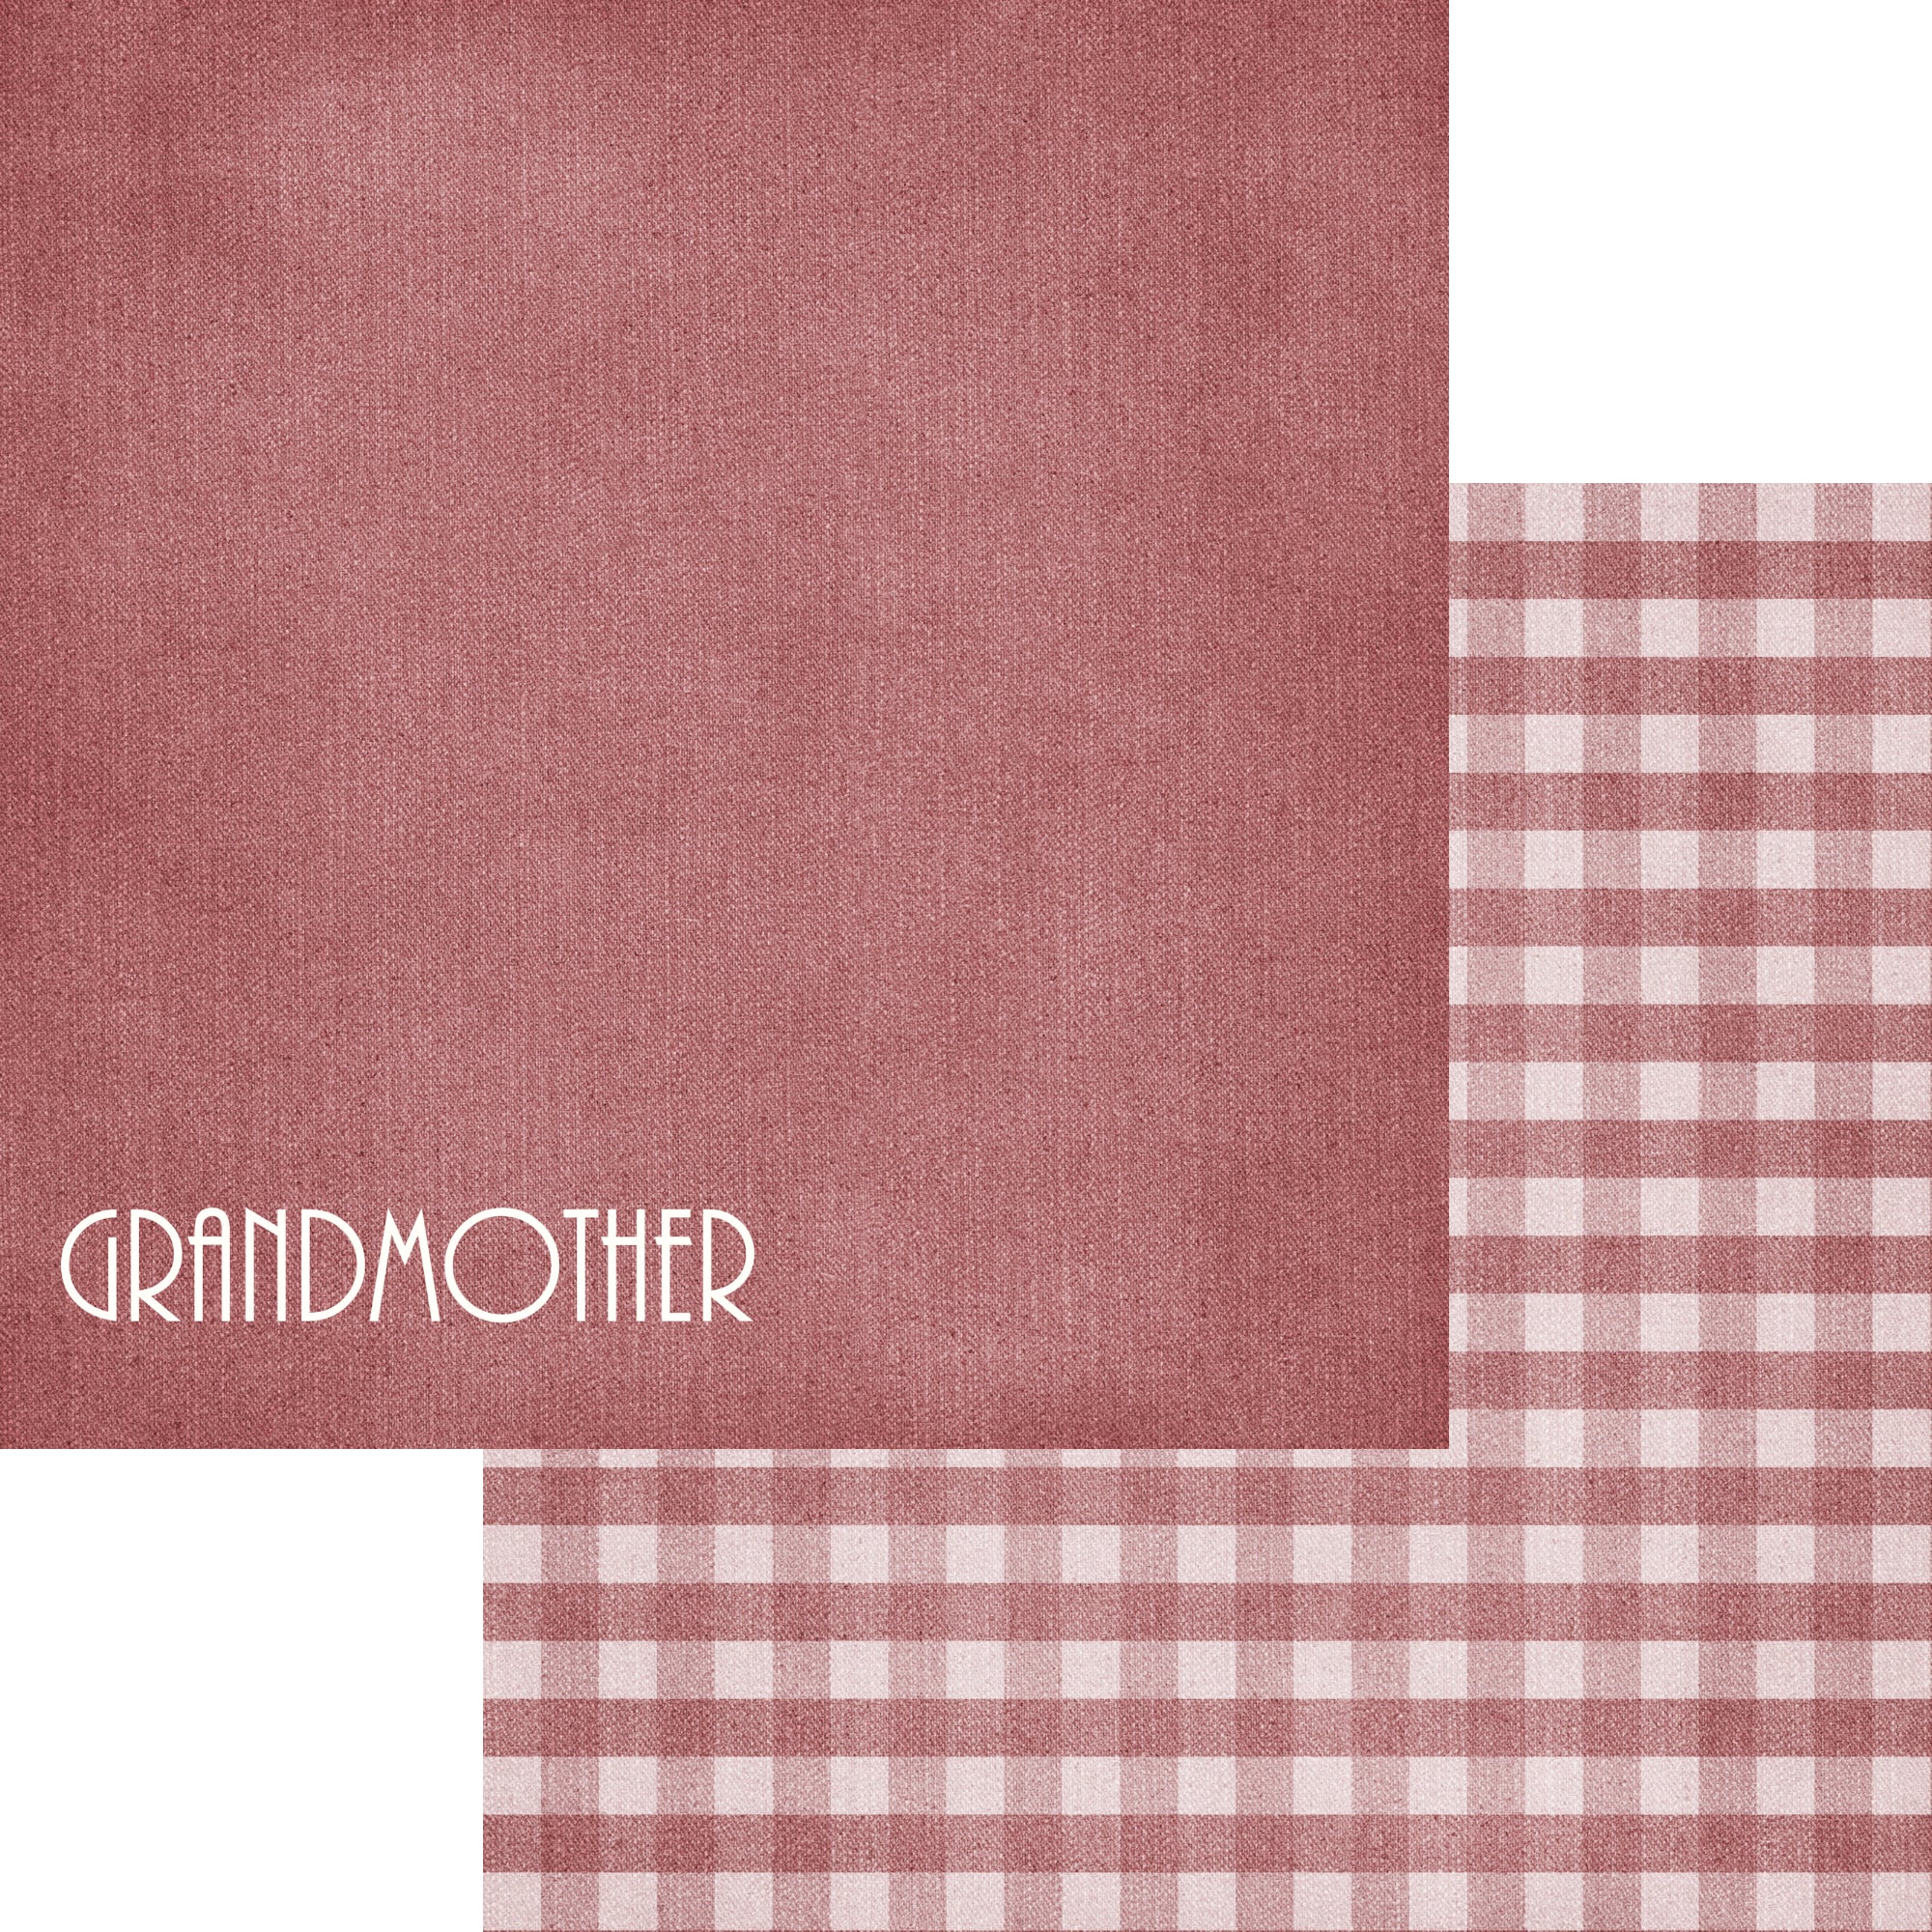 Family Collection Grandmother 12 x 12 Double-Sided Scrapbook Paper by SSC Designs